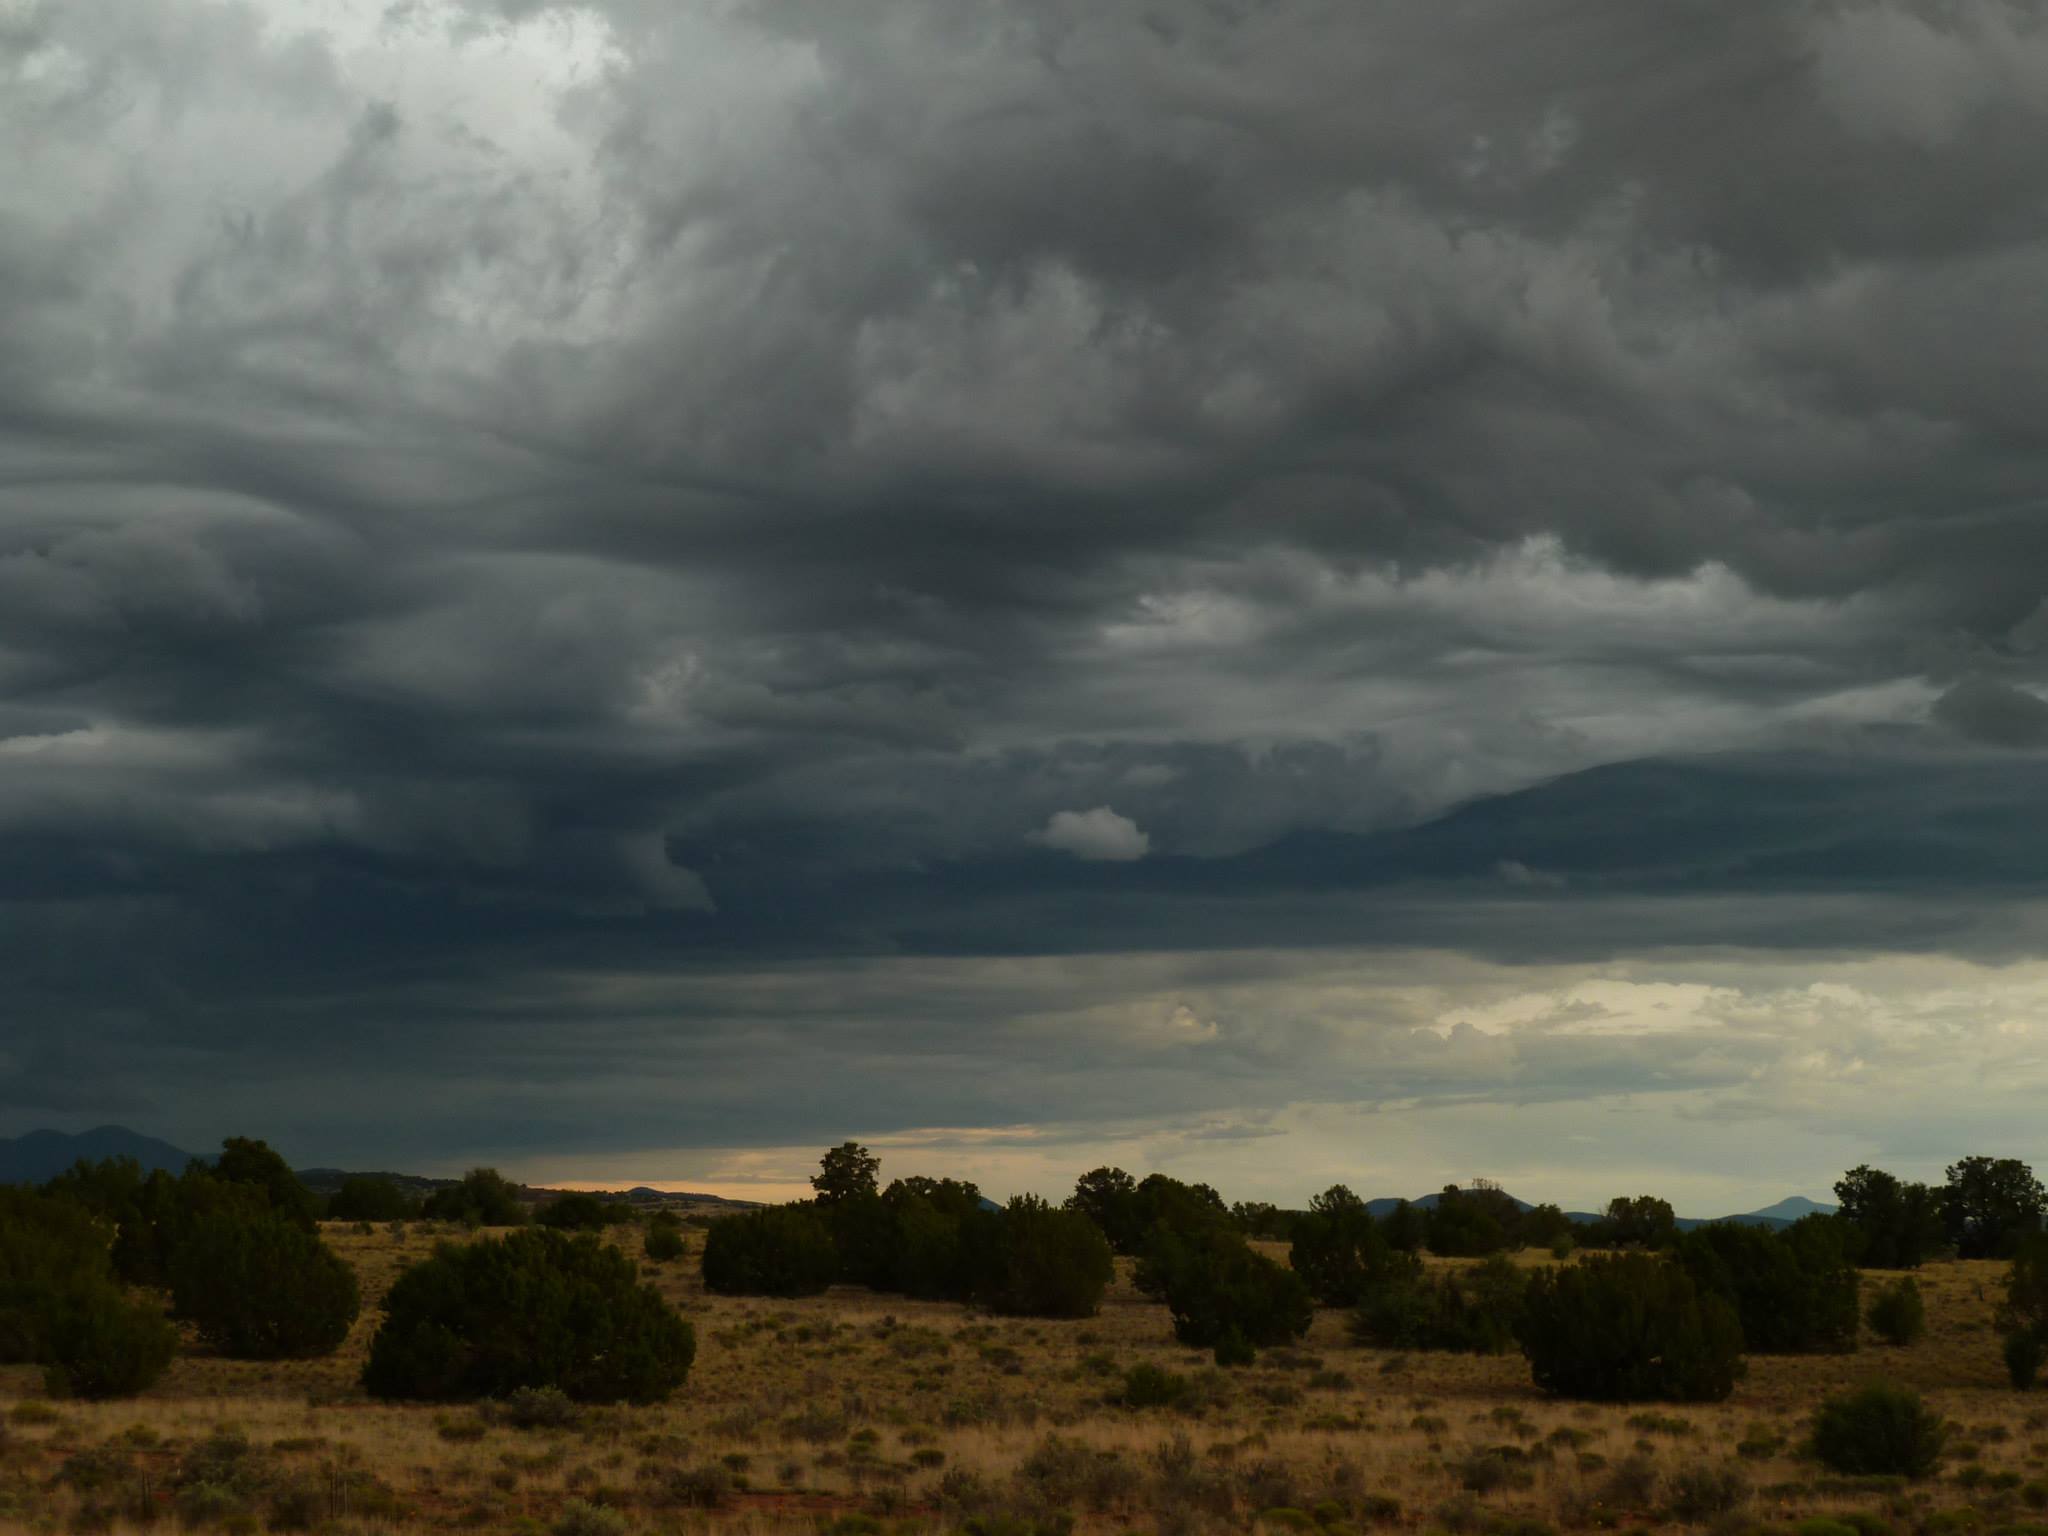 Vibrant storms bring dramatic skies across the Coconino Plateau during summer monsoon season,  July - August.